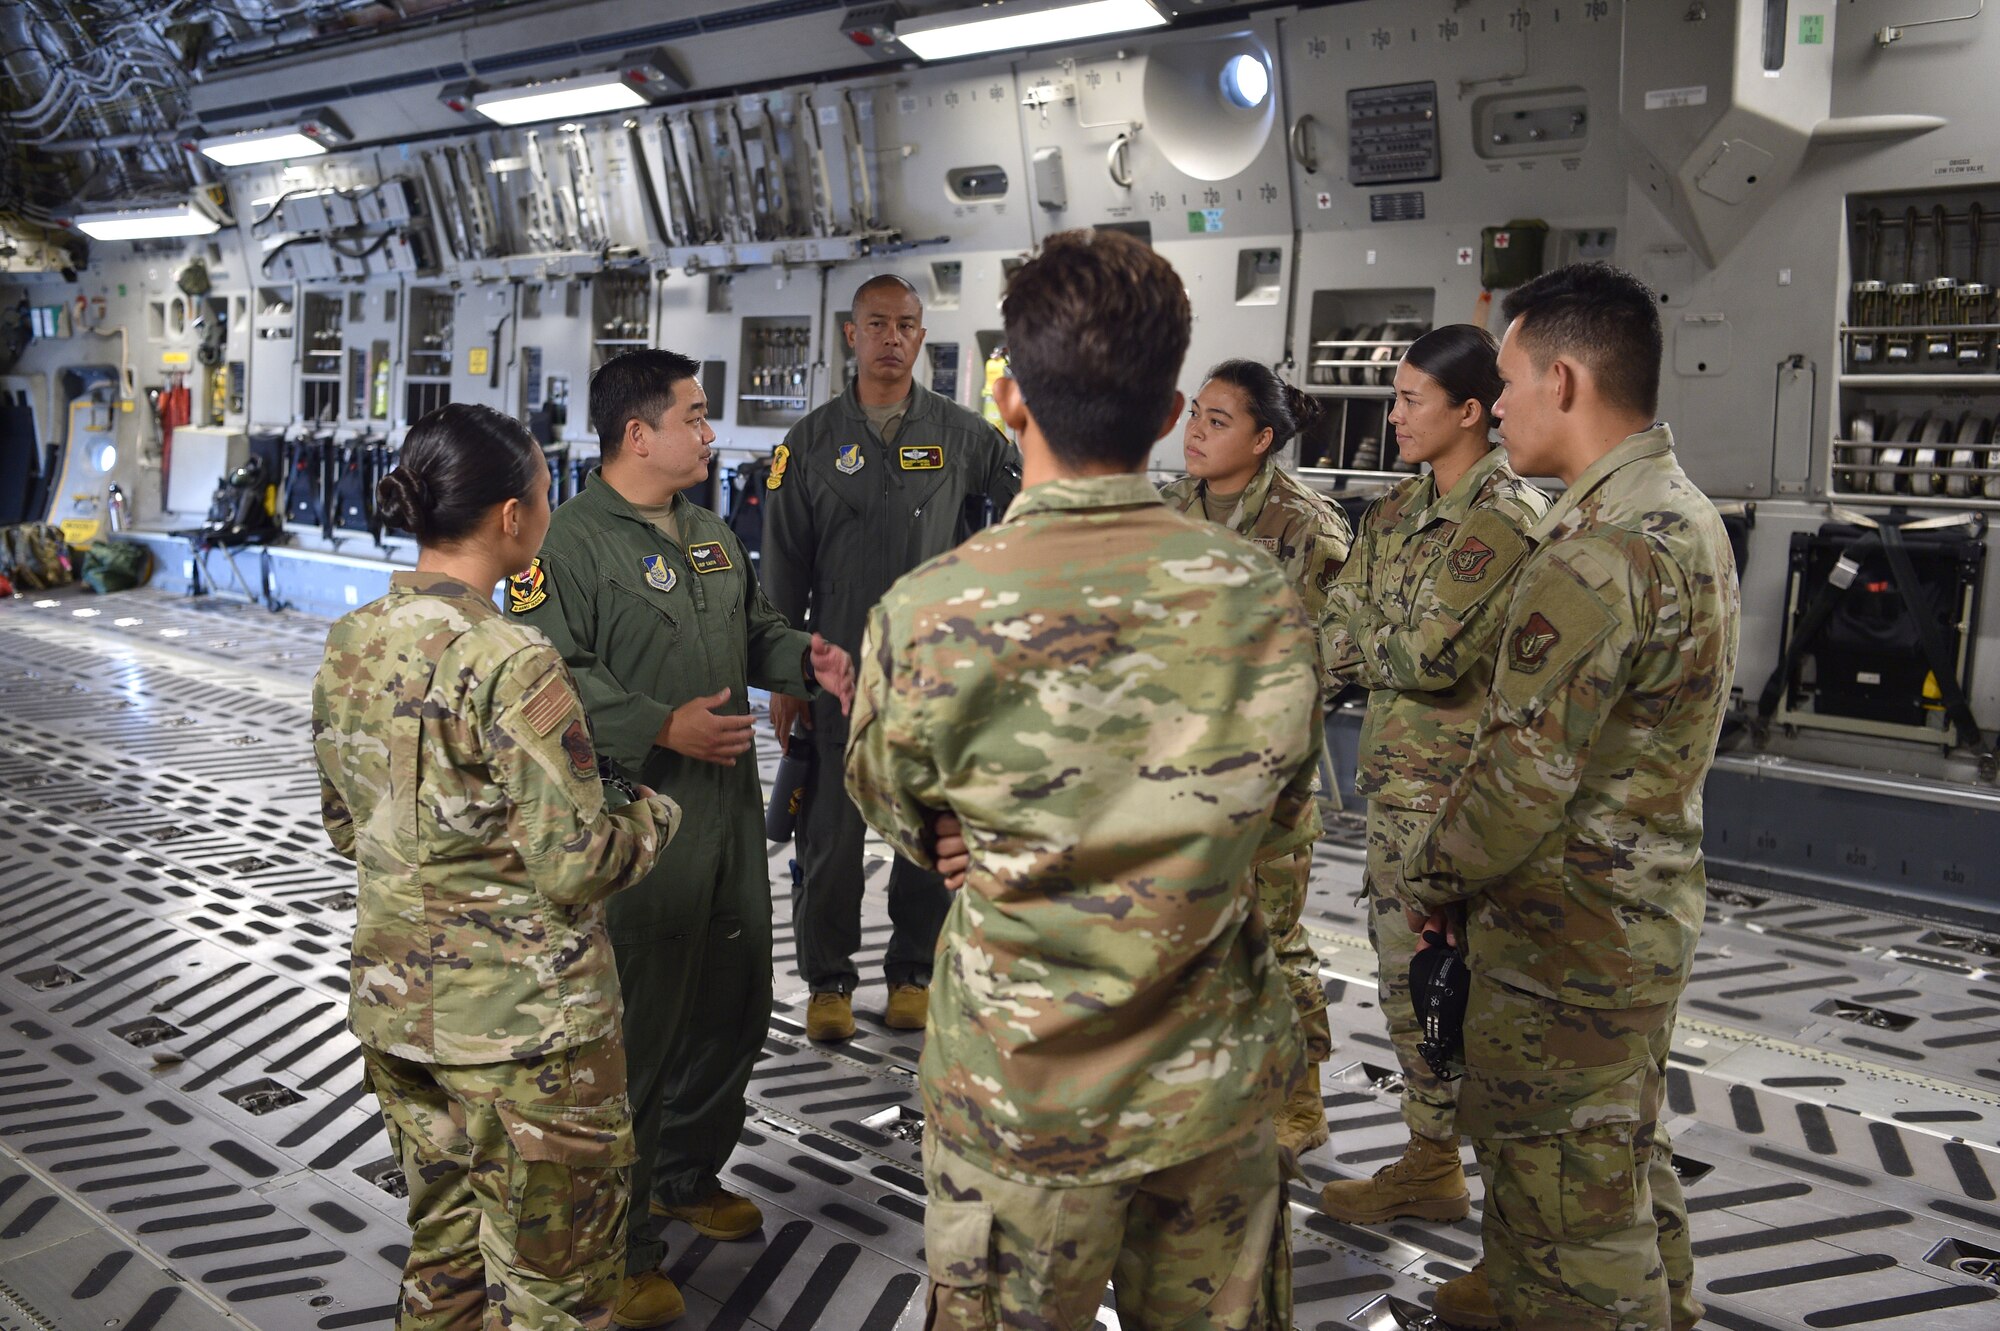 TMaj. Skip Saito and Senior Master Sgt. Brandon Sarceda, both members of the 204th Airlift Squadron, meet with Asian American and Pacific Islander maintenance Airmen from the 15th and 154th Maintenance Groups before taking off on what was for most of them their first C-17 flight, on Joint Base Pearl Harbor-Hickam, Hawaii, May 25, 2021. In honor of Asian American Pacific Islander Heritage Month, the 15th Wing and 154th Wing flew a routine training mission composed with aircrew and maintainers who were all of Asian American or Pacific Islander descent and were a mix of active duty and Air National Guard members. (U.S. Air Force photo by 1st Lt. Amber R. Kelly-Herard)